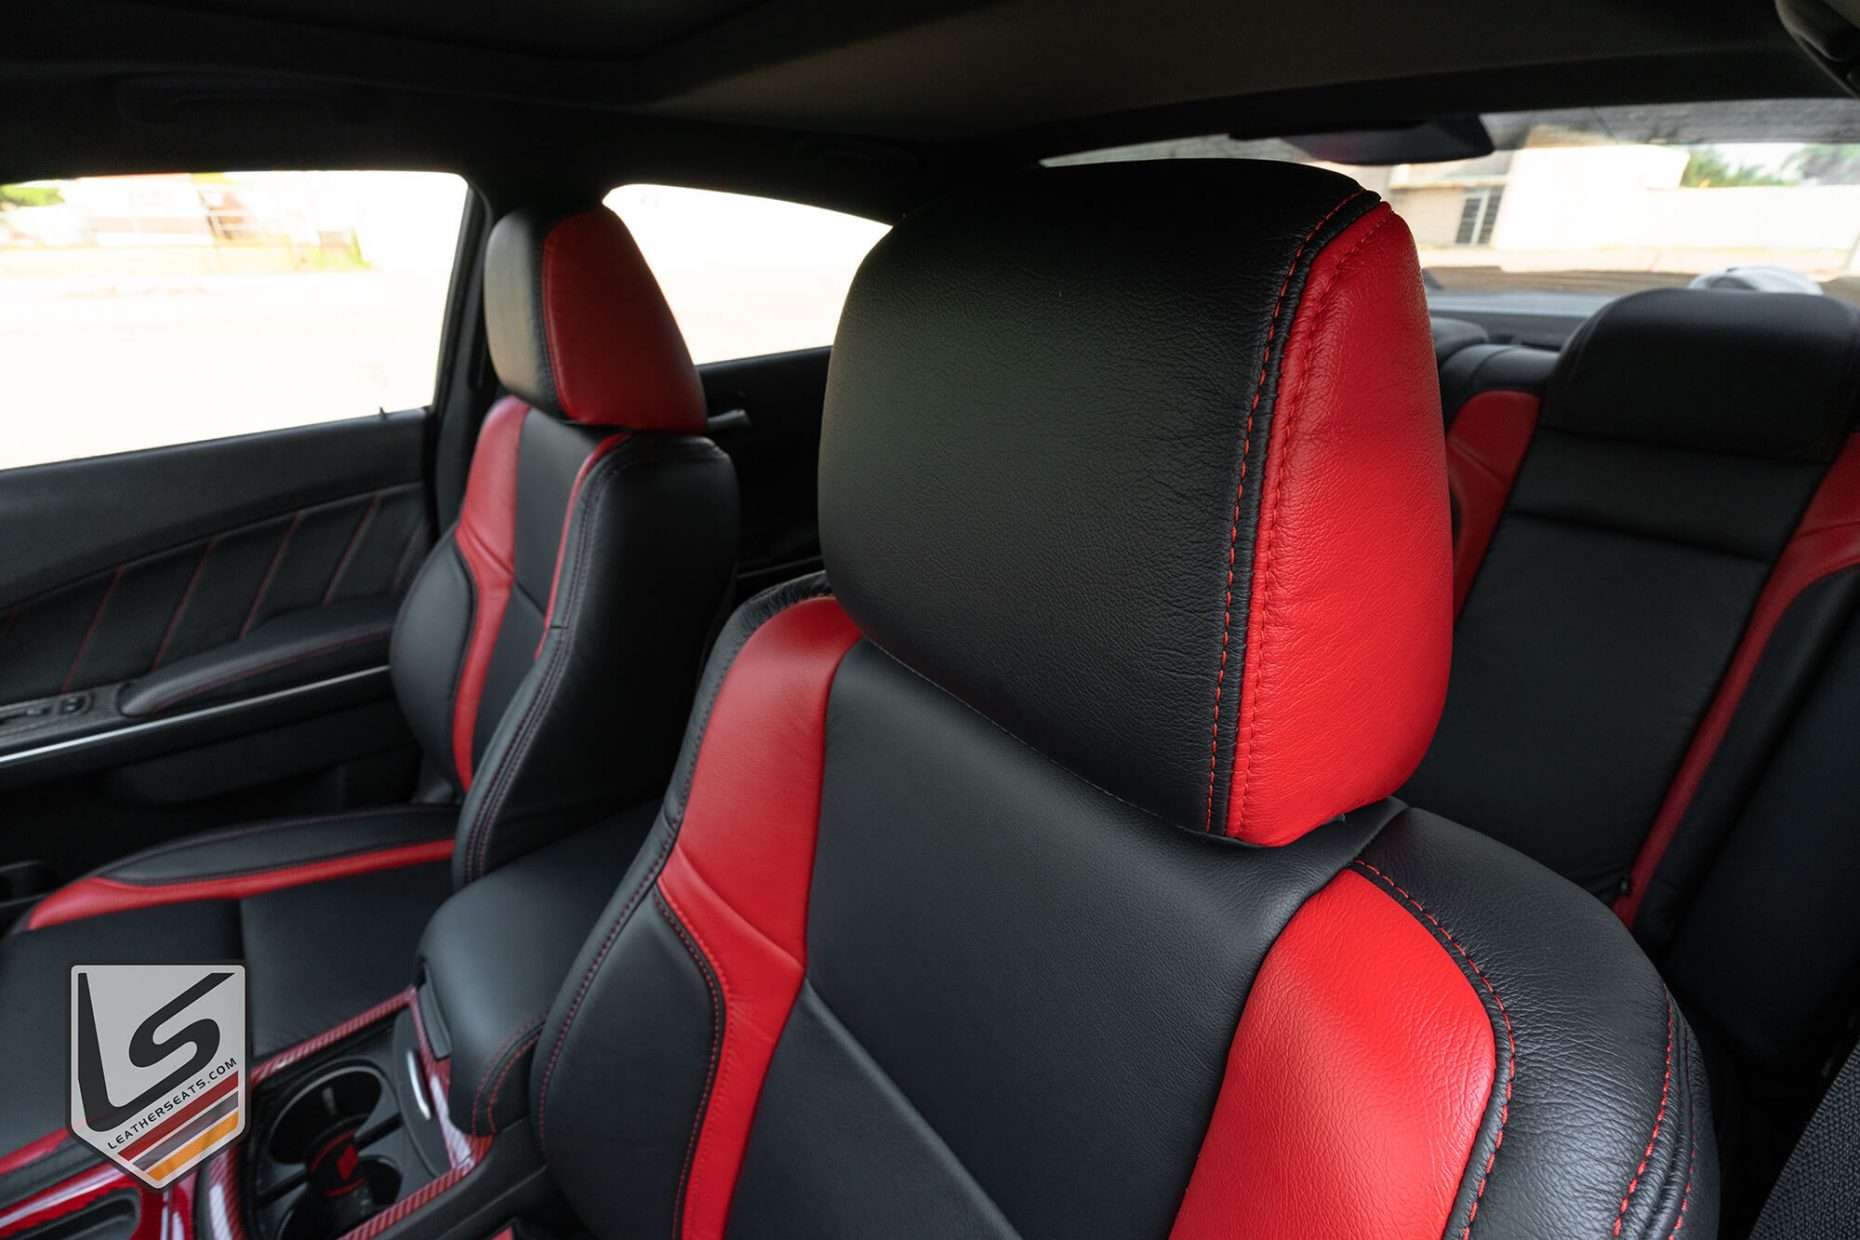 Black and Bright Red headrest close-up with contrasting Bright Red stitching